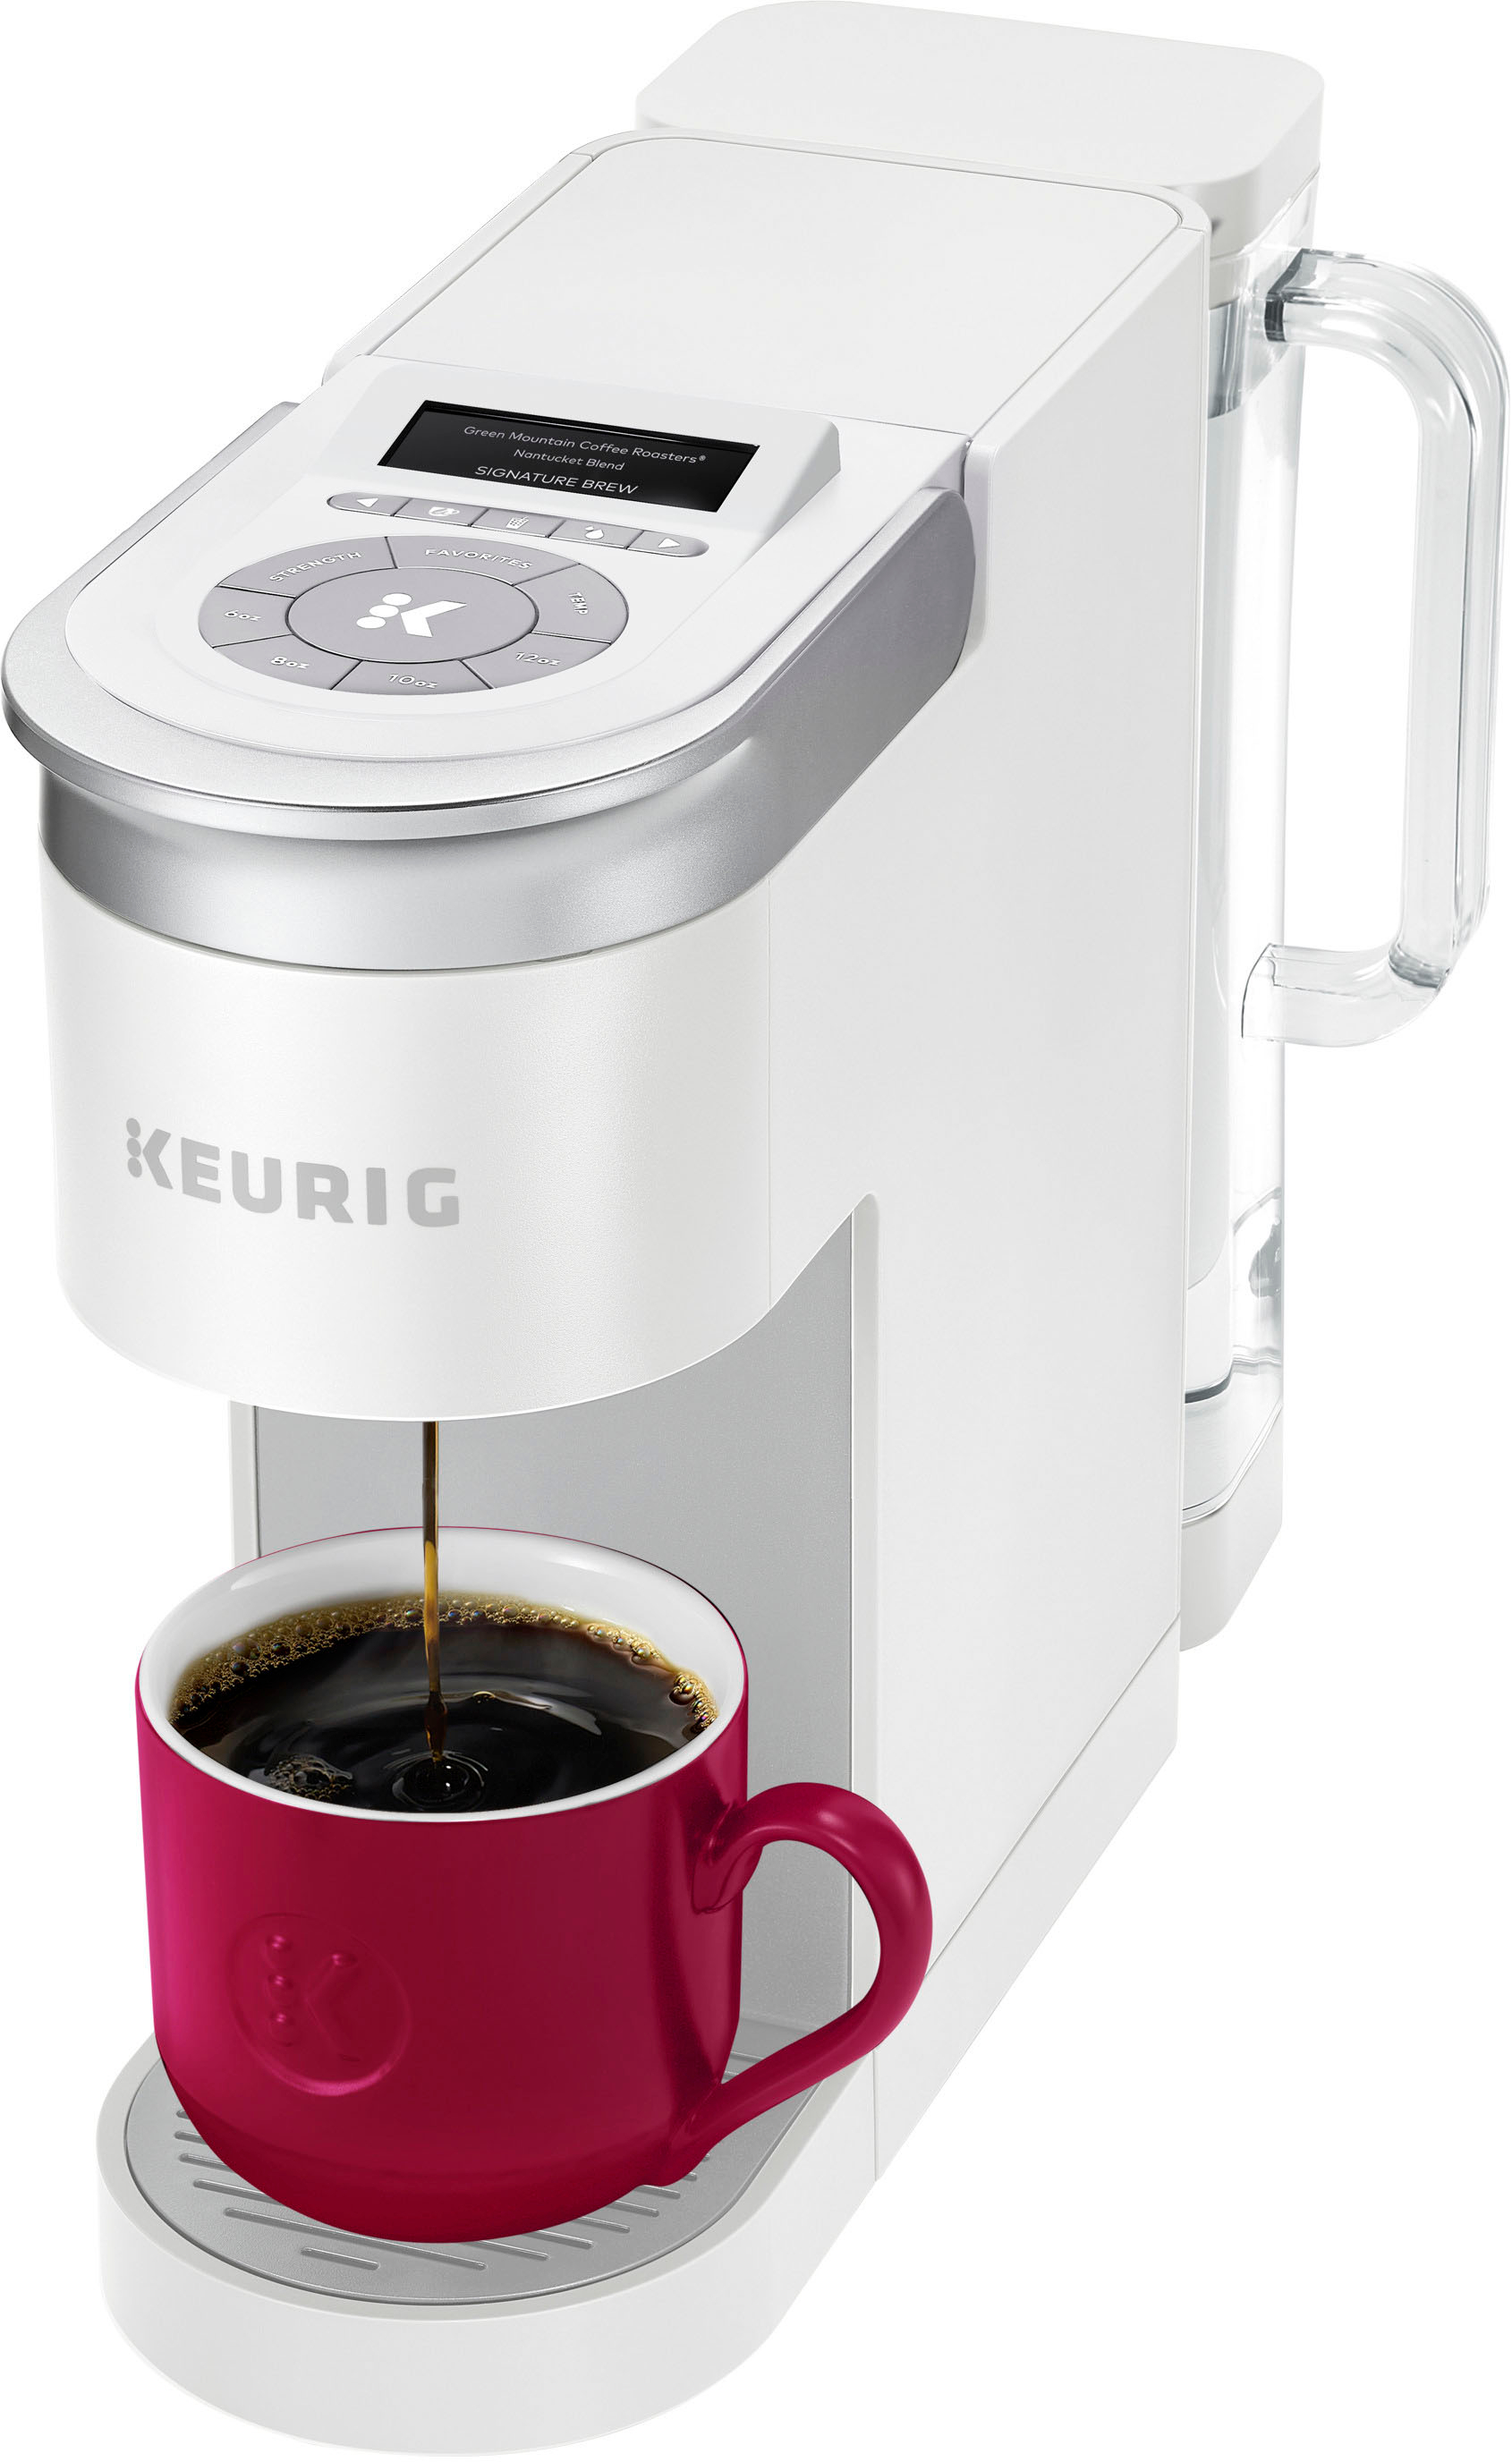 Keurig K-Supreme SMART Single Serve Coffee Maker With Wifi Compatibility, 4  Brew Sizes, Black & 3-Month Brewer Maintenance Kit, Compatible Classic/1.0